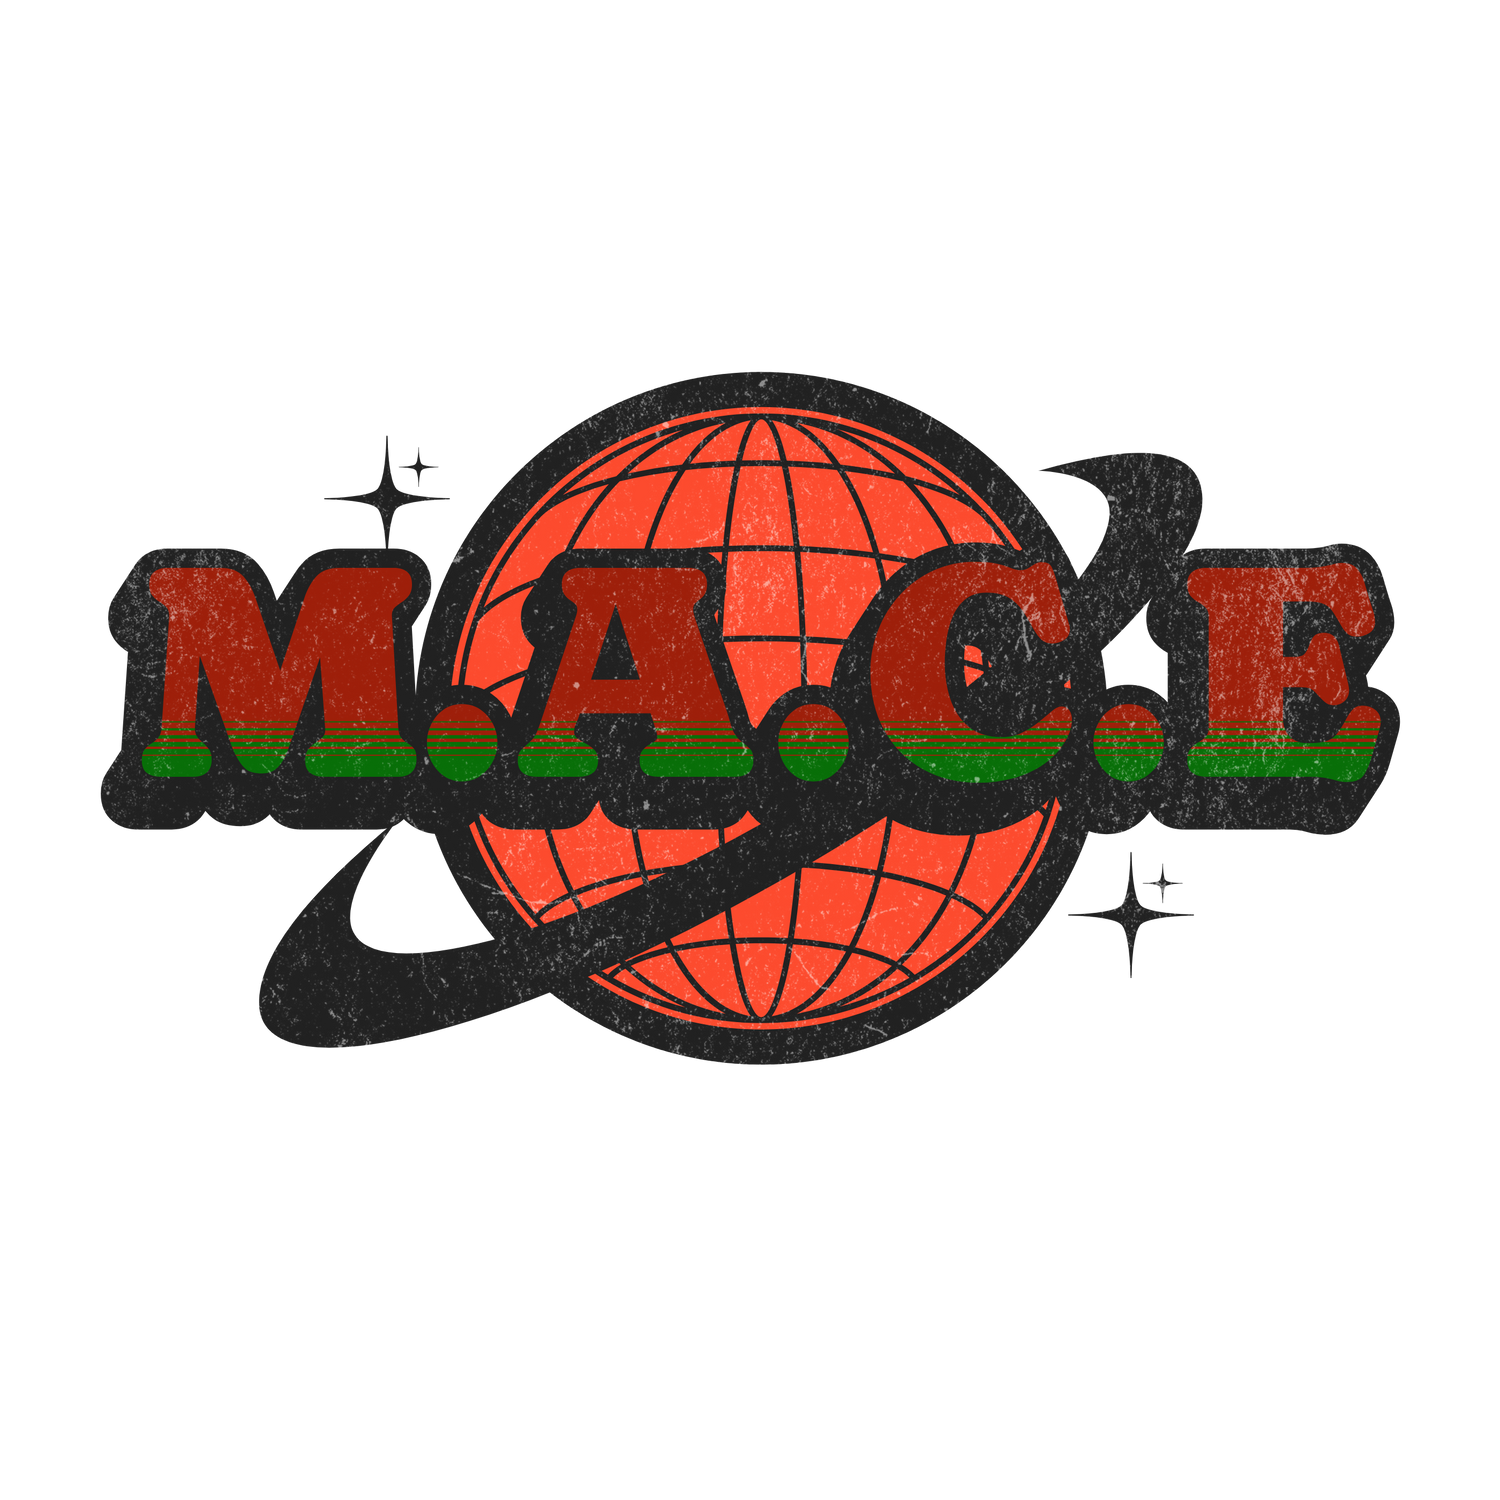 M.A.C.E Collection Inspired By Macen Thomas